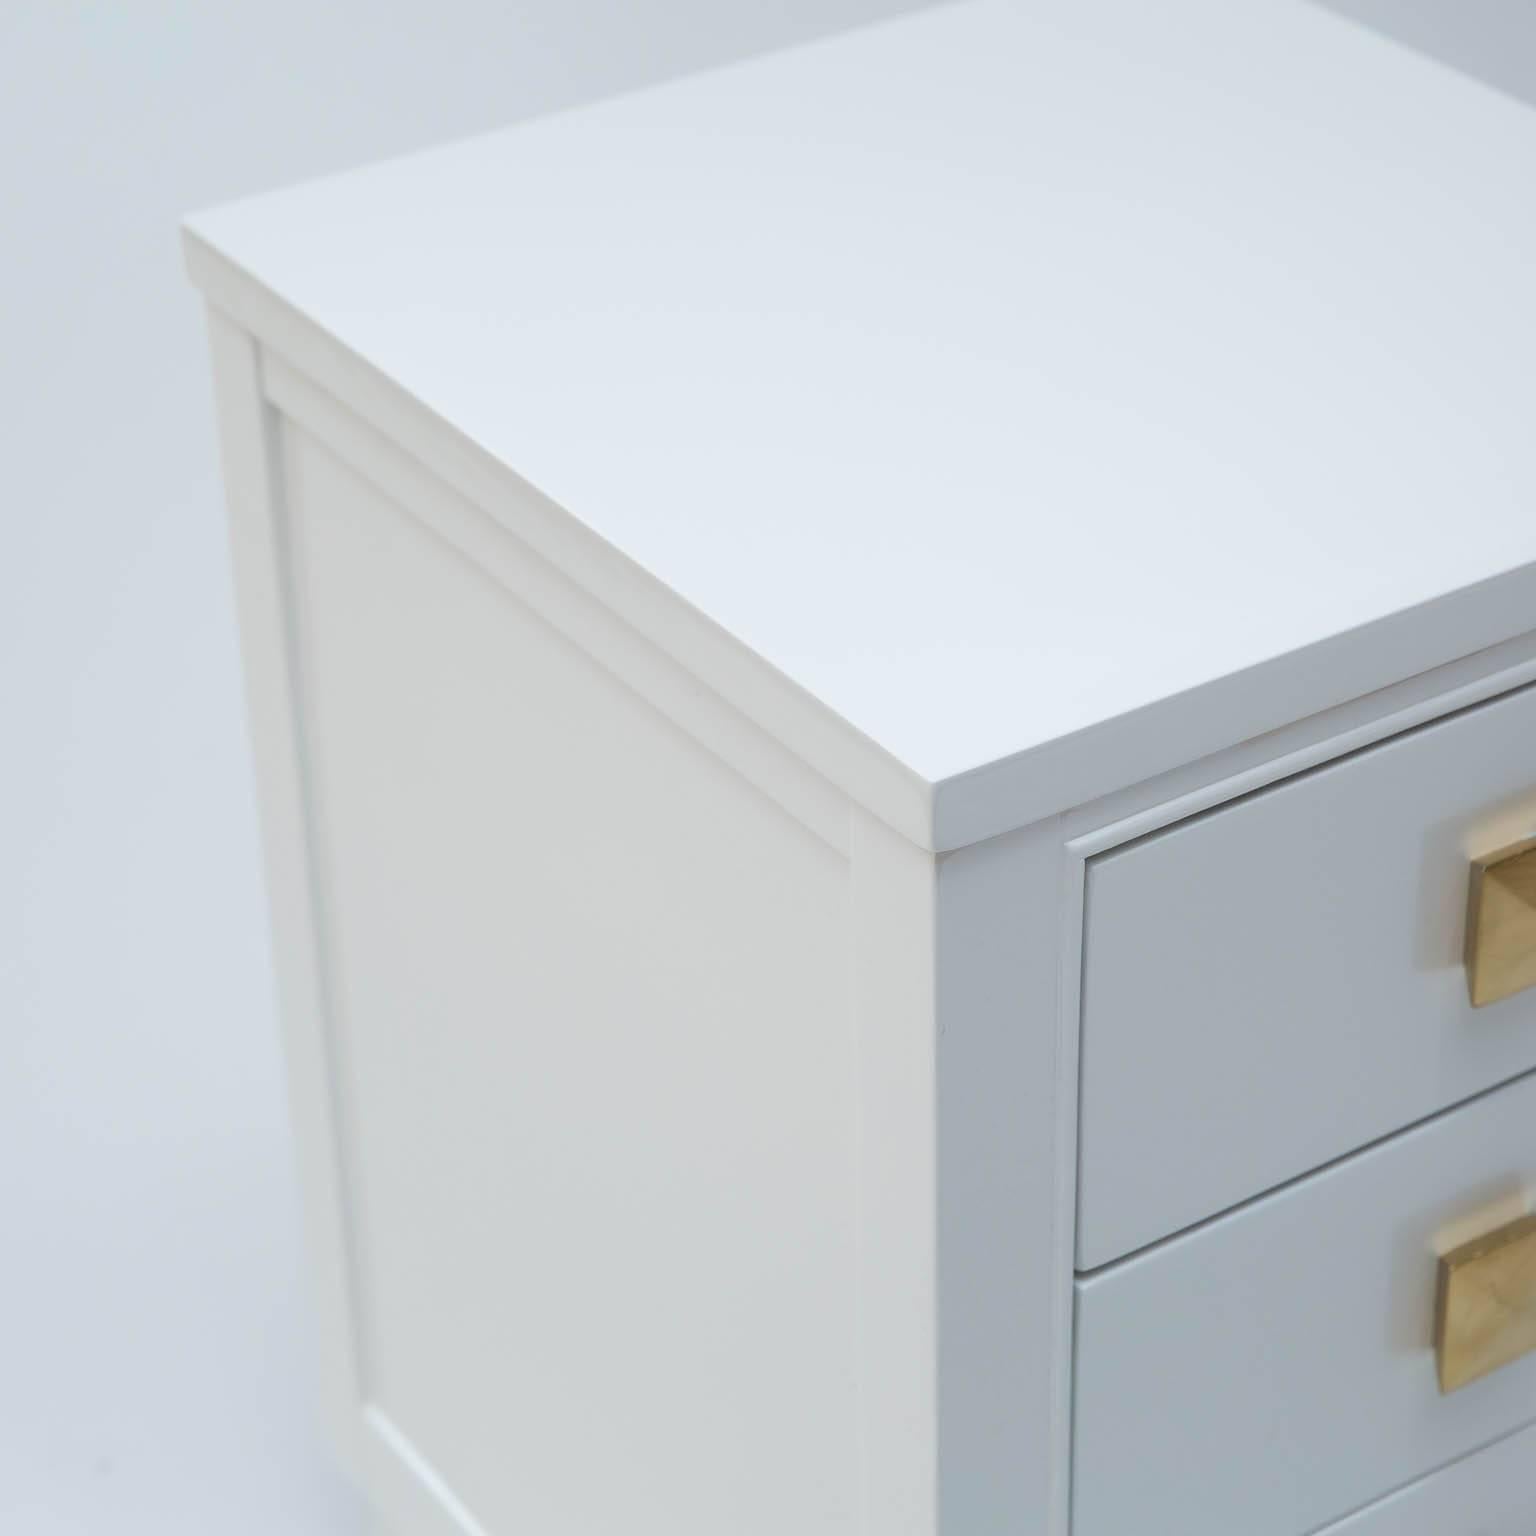 Vintage set of 1950s era three-drawer nightstands given a new lease on life, freshly lacquered in white dove. Solid wood drawer pulls are lacquered in a metallic gold.